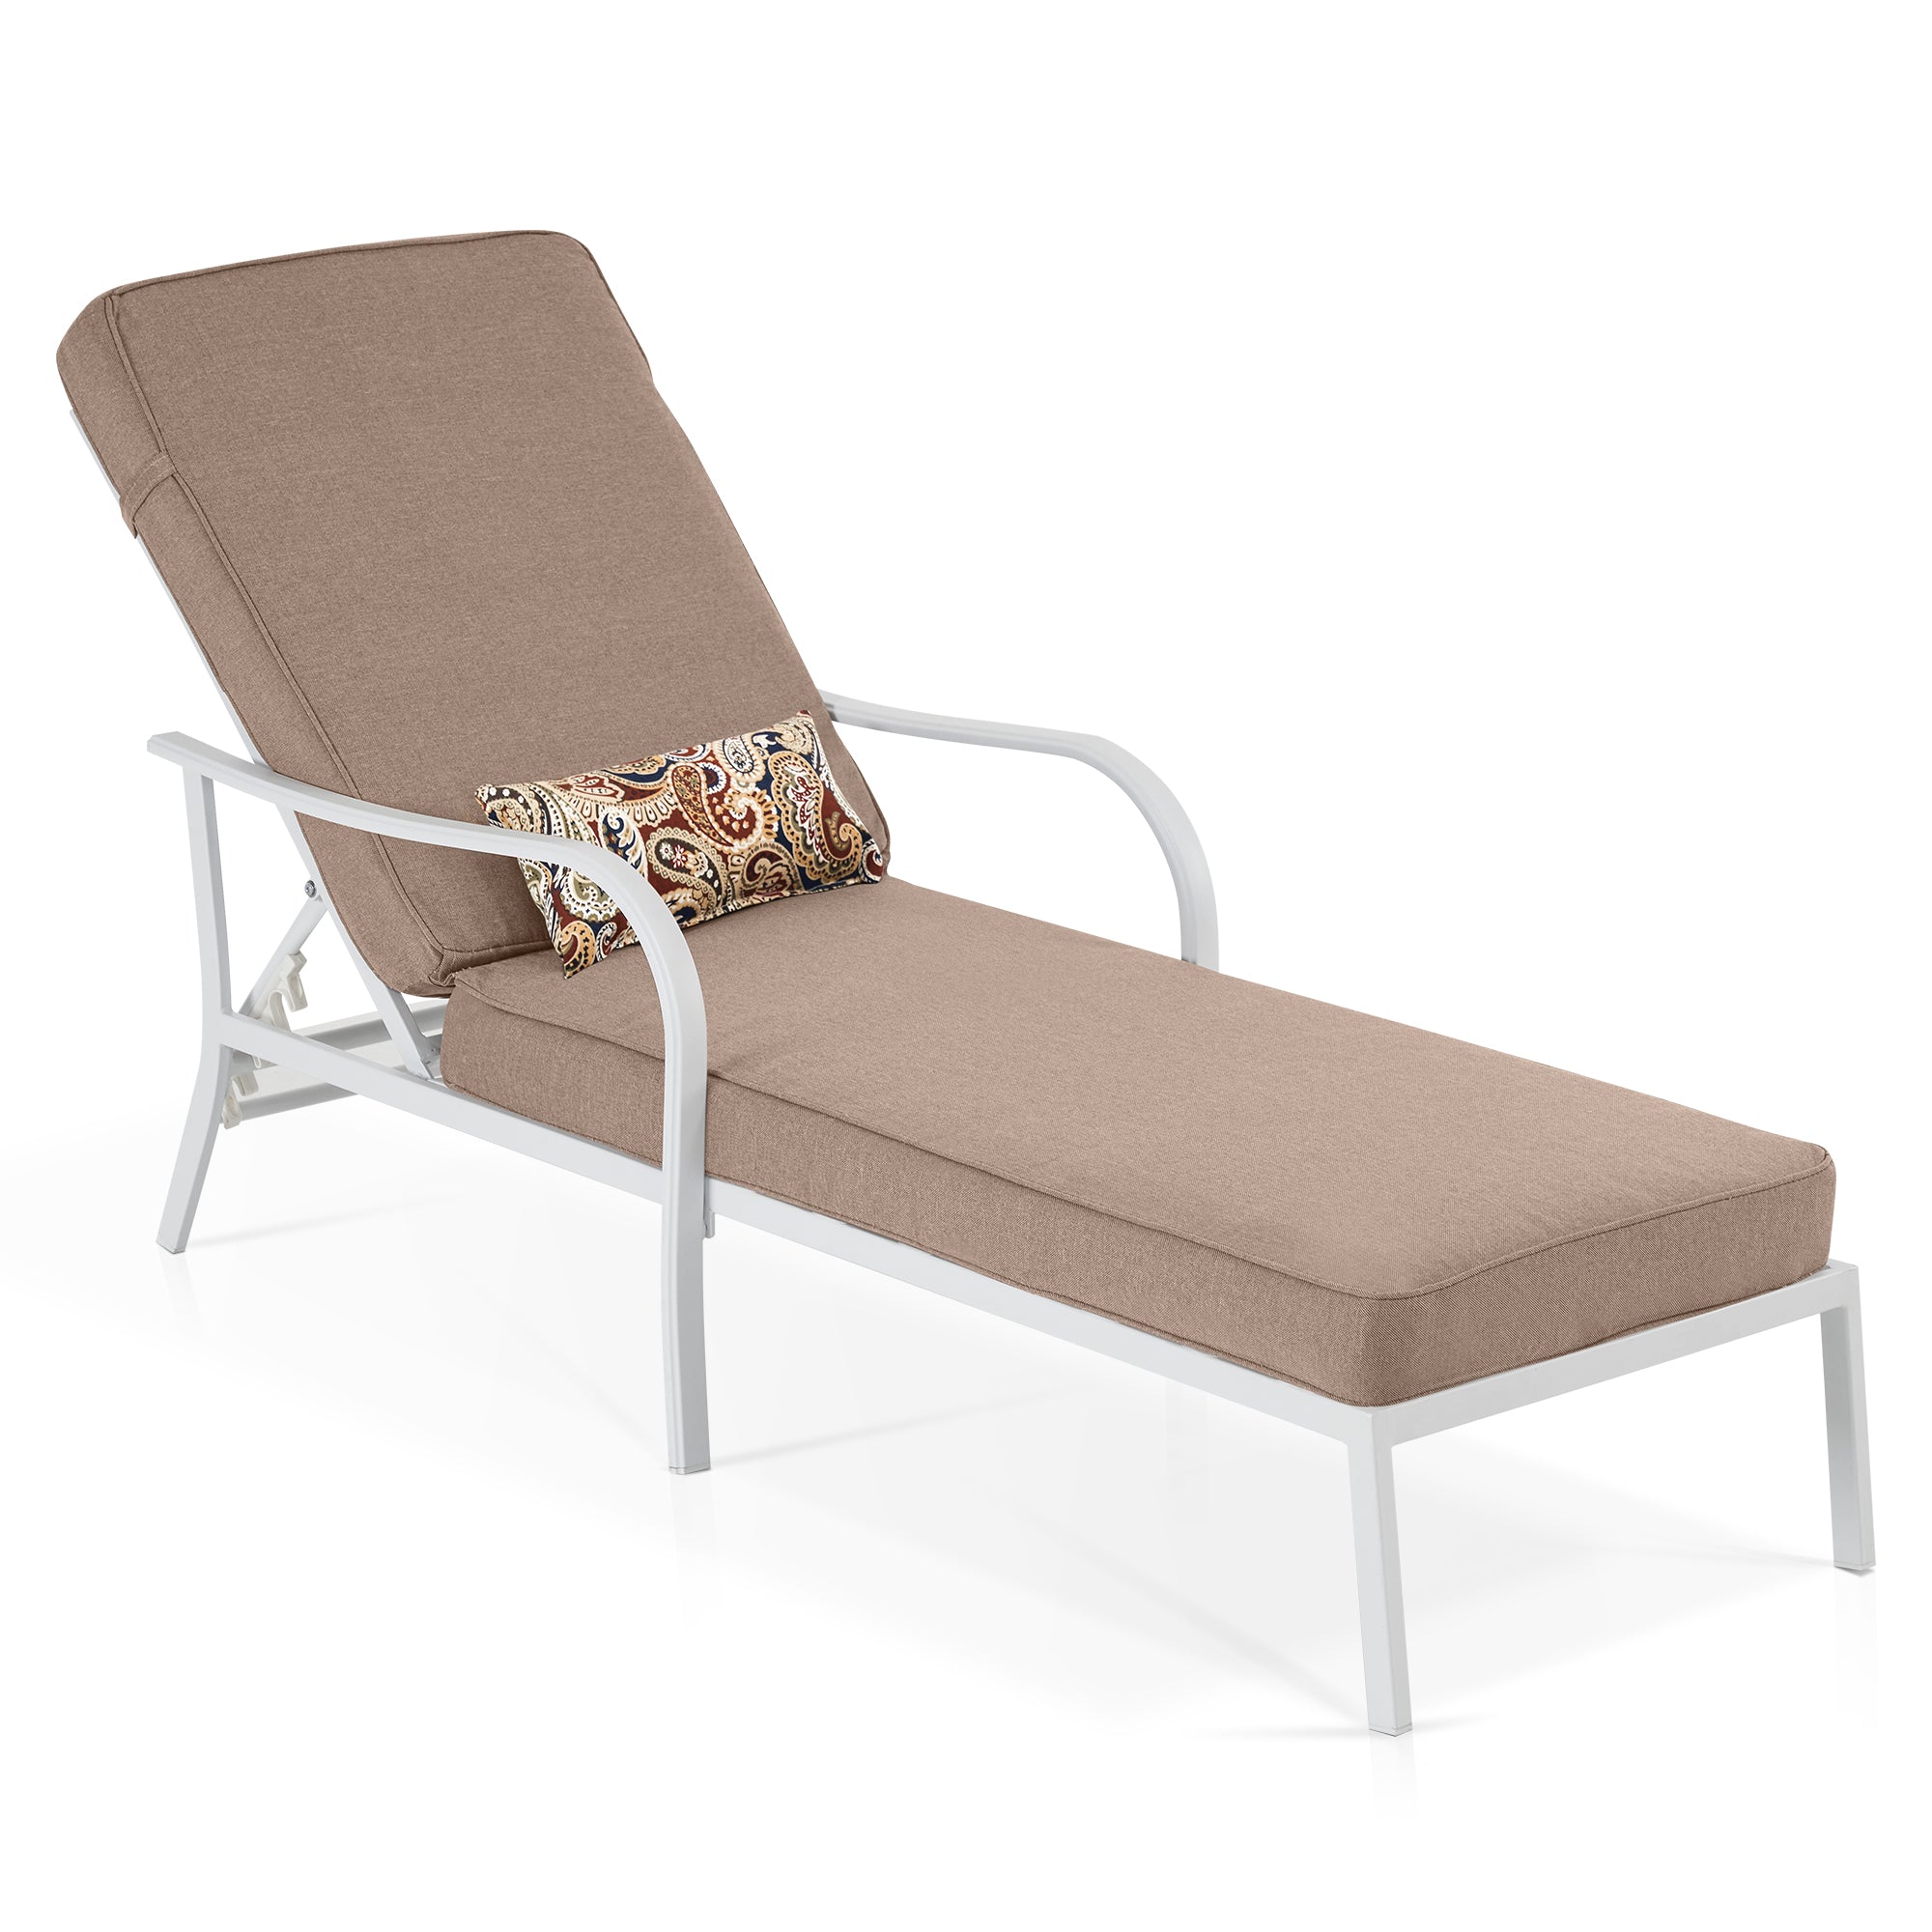 Outdoor Chaise Lounge Chair with Thick Cushion, Adjustable Backrest Reclining Outdoor Chaise Lounge with Lumbar Pillow for Poolside Patio